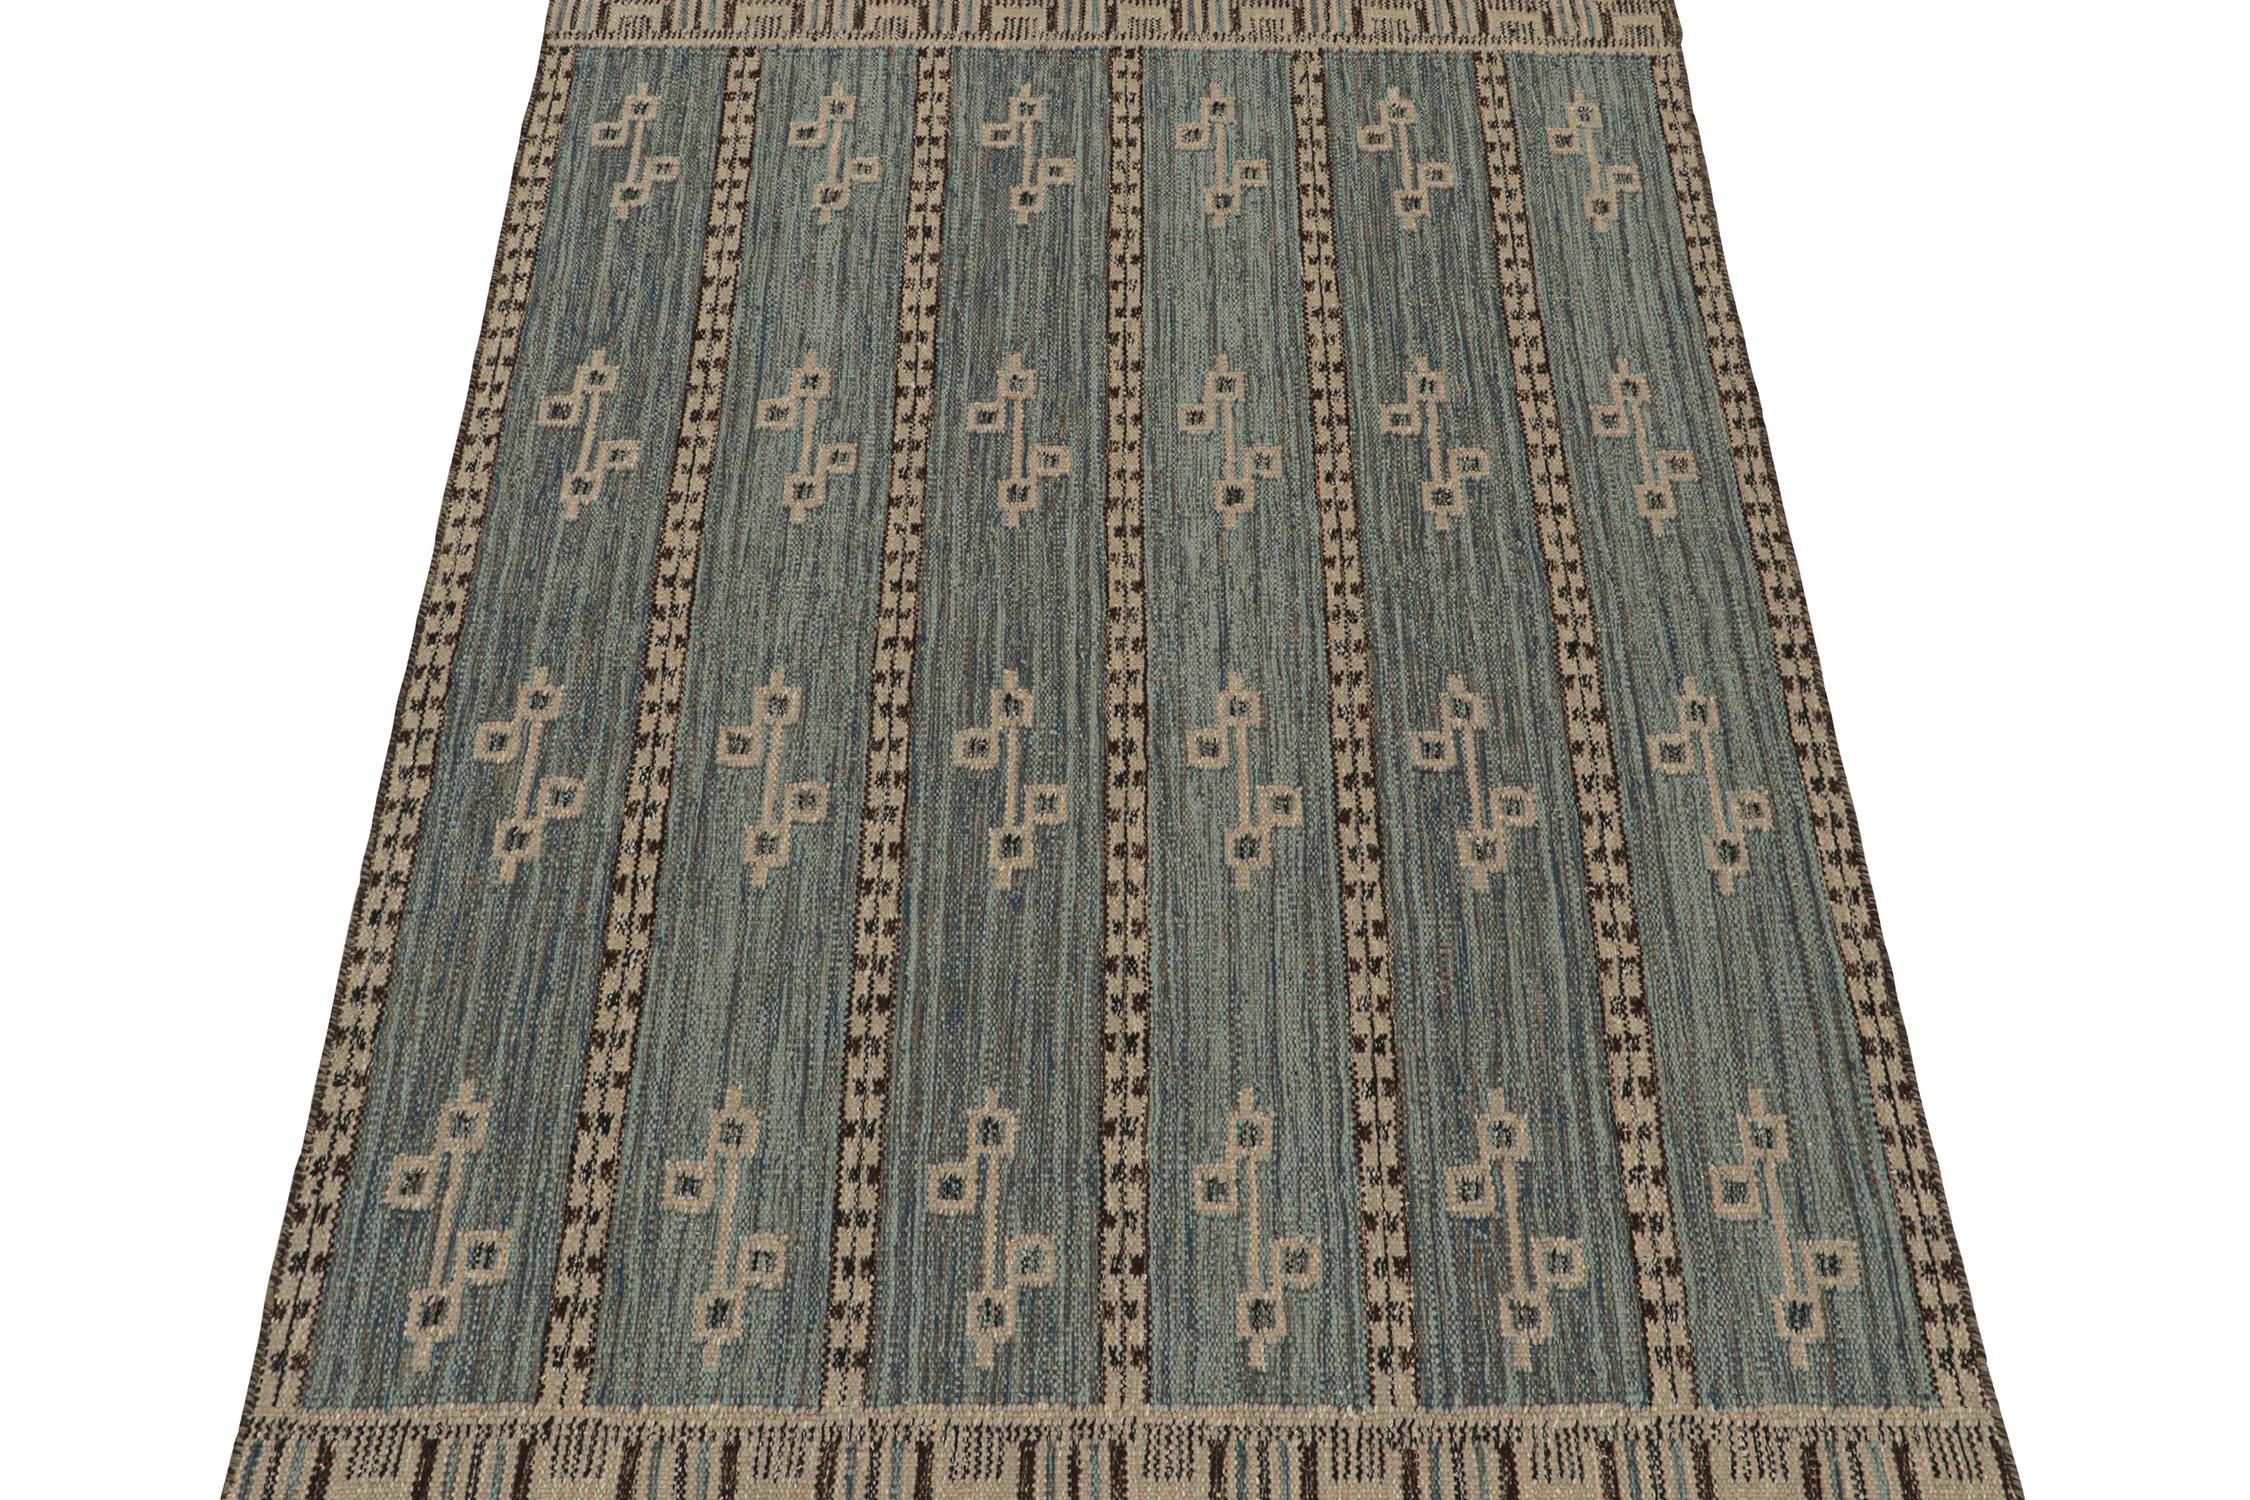 This 6x9 flat weave is a new addition to the Scandinavian Kilim collection by Rug & Kilim. Handwoven in wool and natural yarns, its design reflects a contemporary take on mid-century Rollakans and Swedish Deco style.

On the Design:

This new